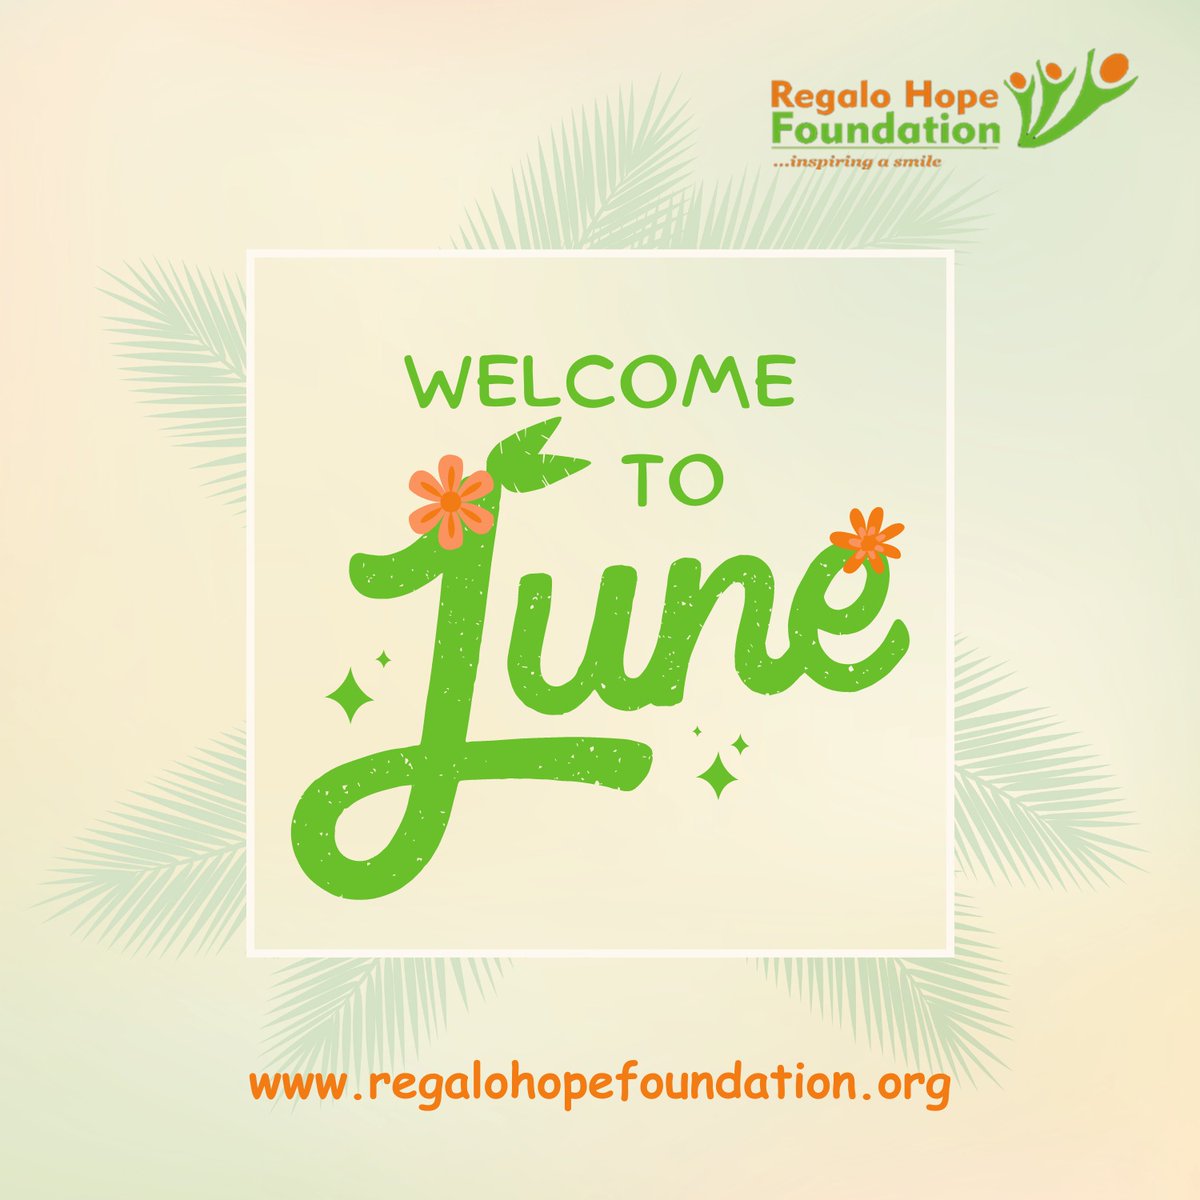 Welcome to the month of June.

#regalo #fortheloveofhumanity #fortheloveofmankind #welovewhatwedo #wewontstop #werisebyliftingothers #touchinglives #togetherwerise #togetherwecan #togetherwechangetheworld #impactmakers #impactfulliving #socialimpact #regalohopefoundation